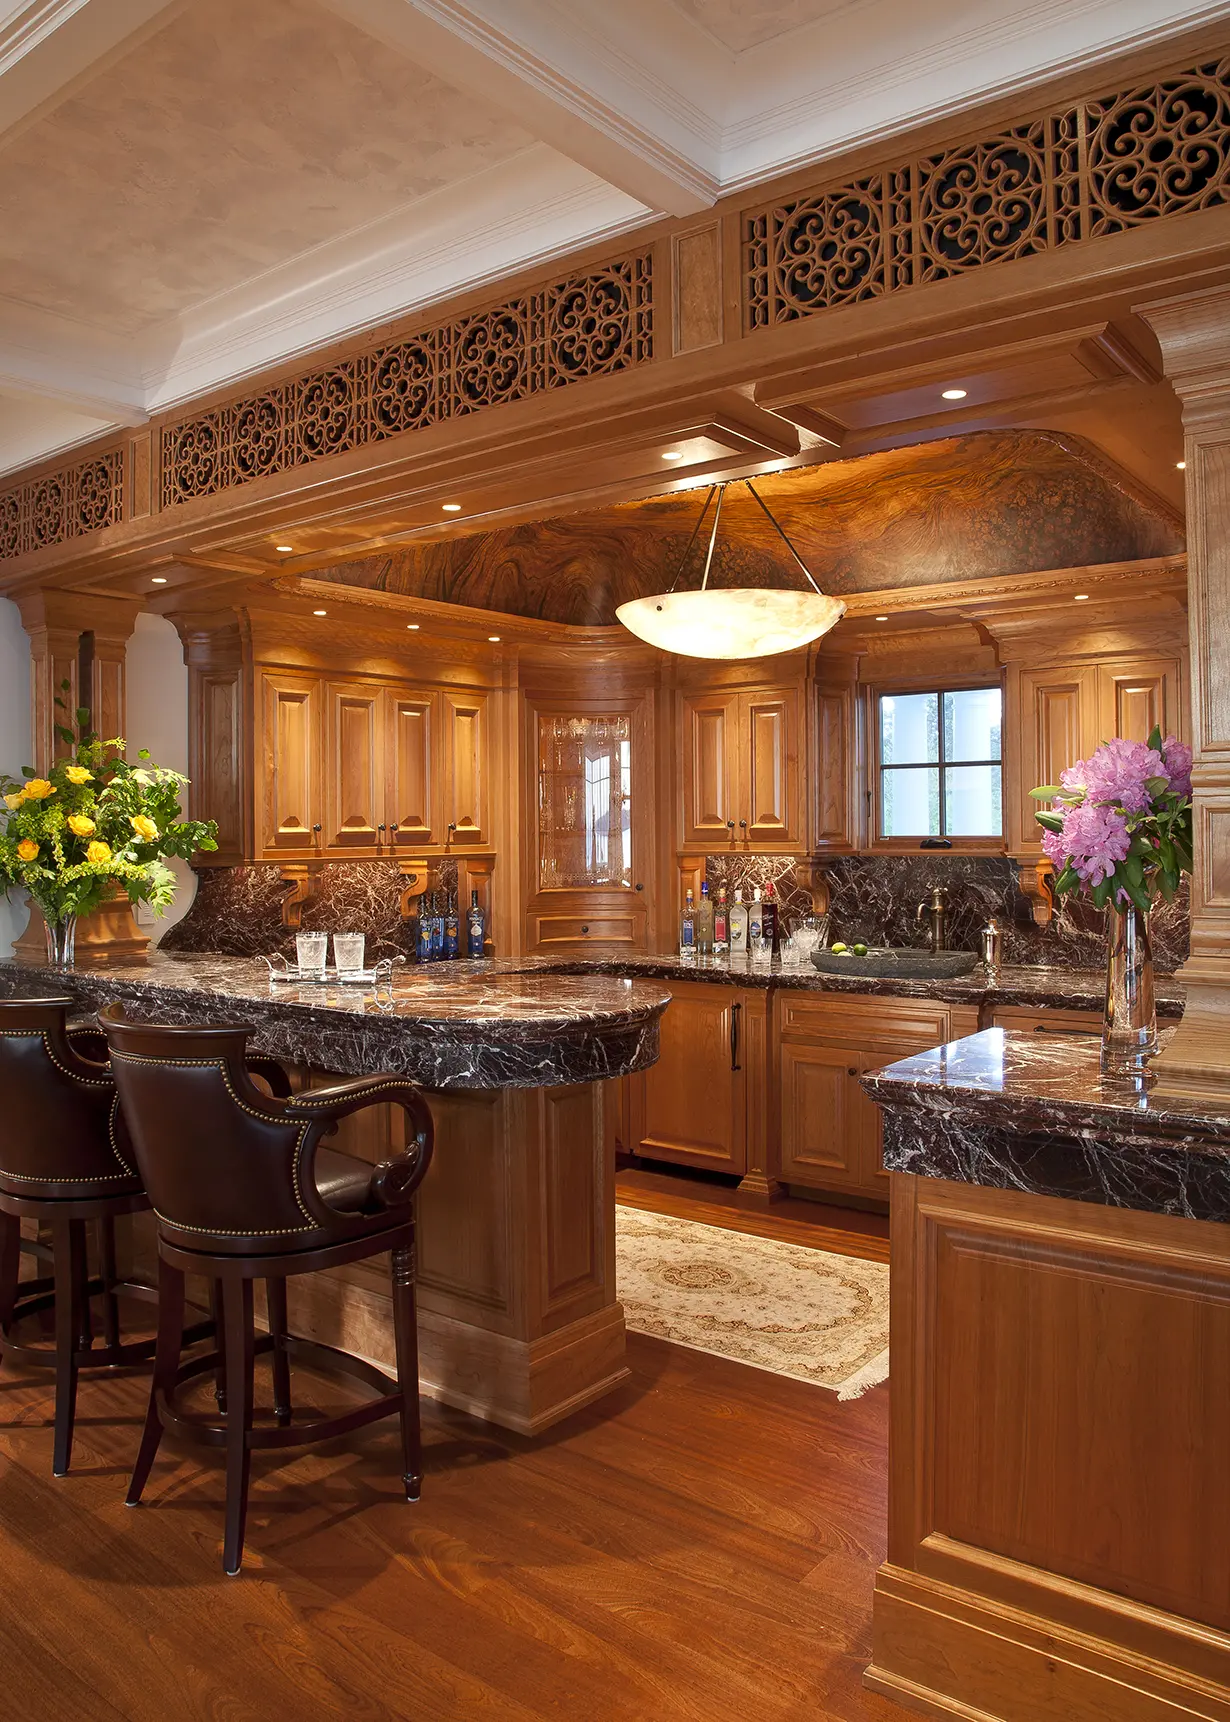 View of kitchen with ornate wood carvings and leather bar seats